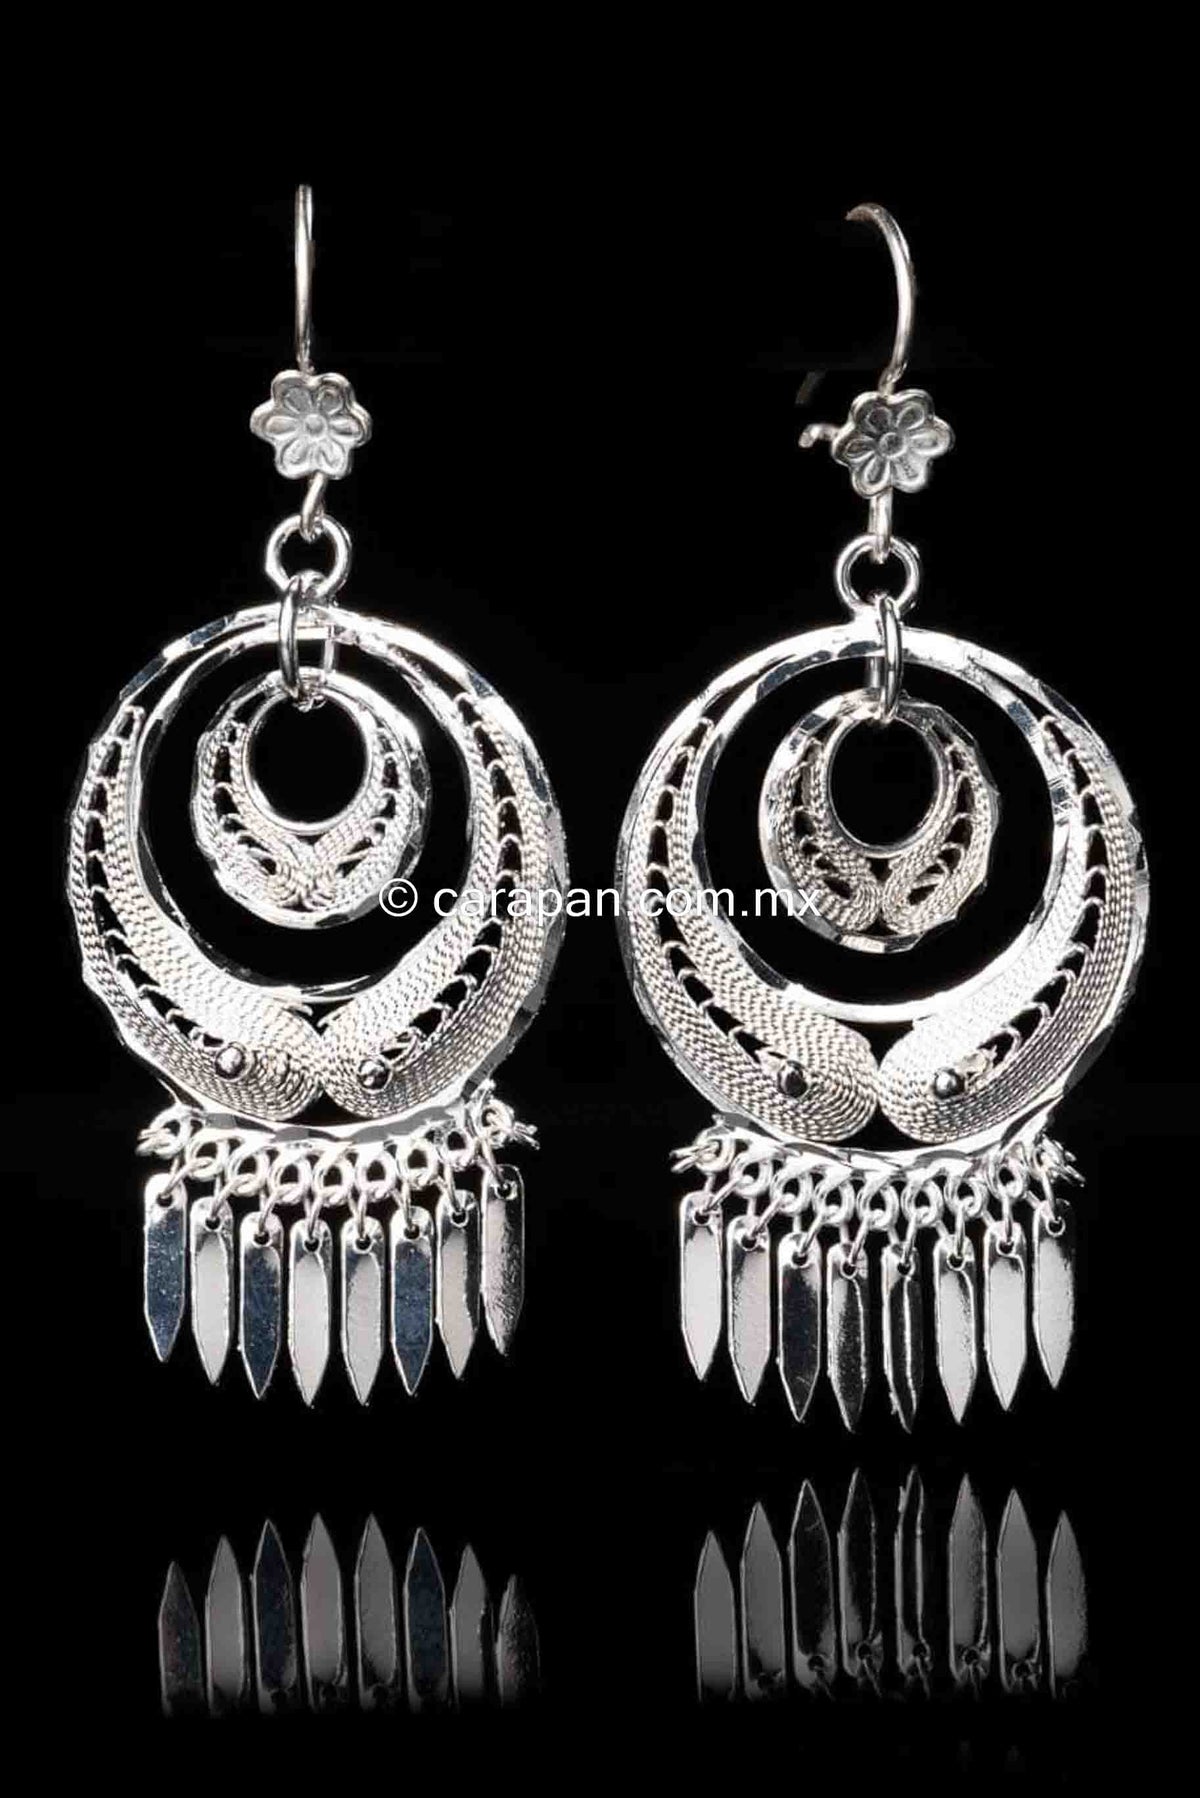 Circle Earrings Mexican Sterling Silver Filigree